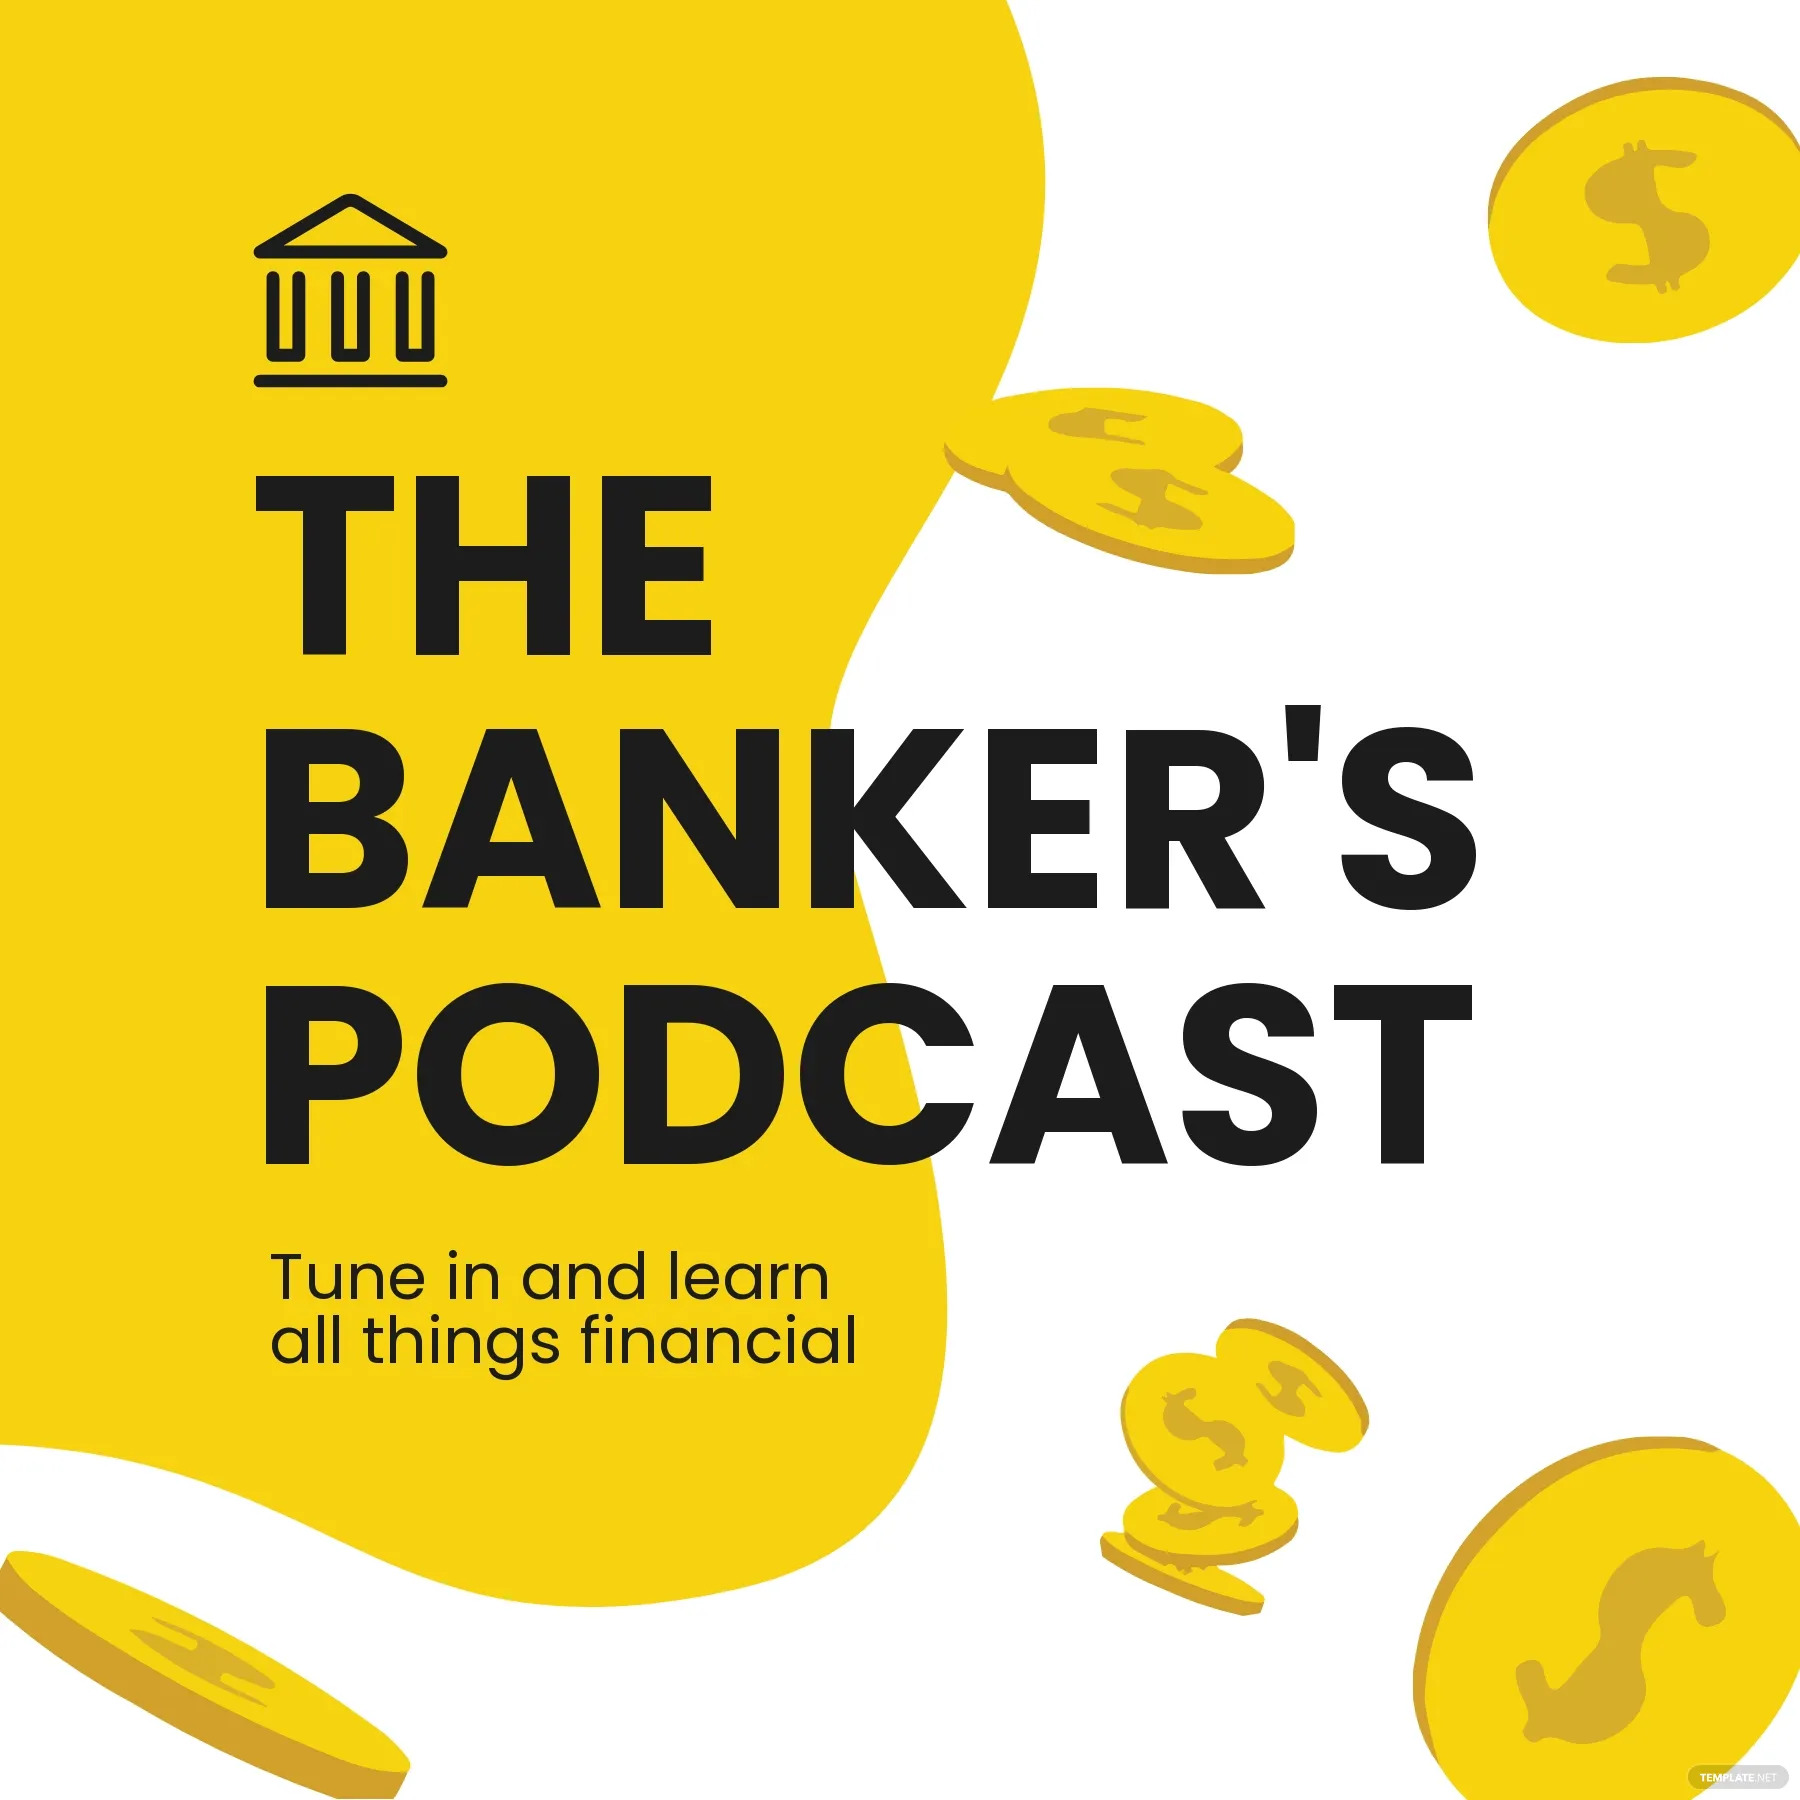 finance podcast cover ideas and examples